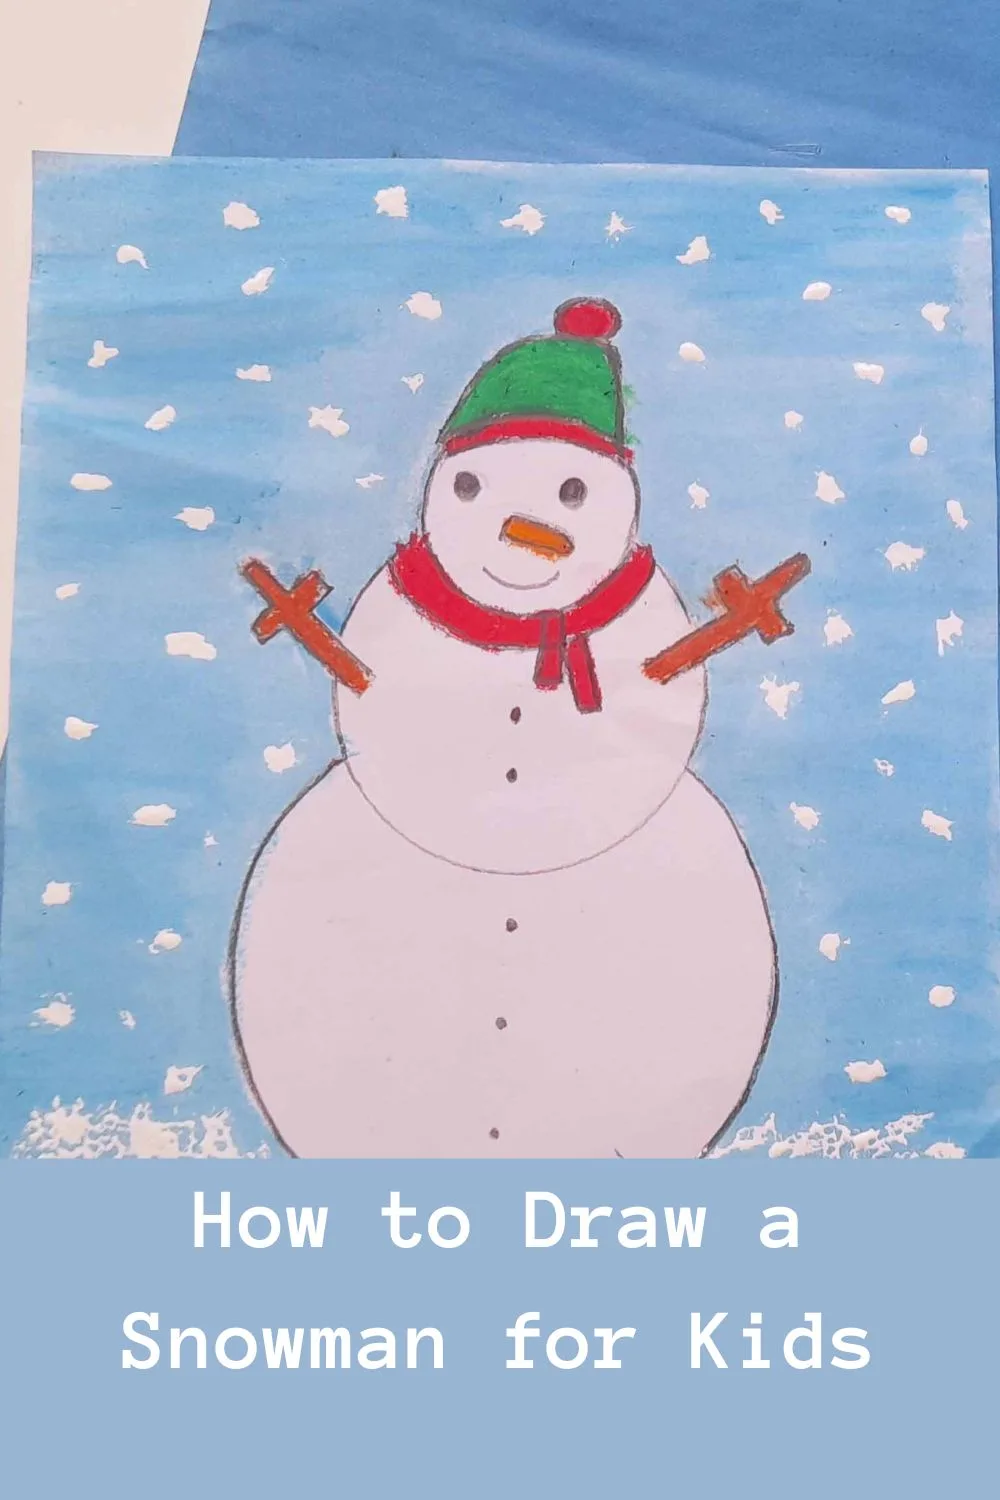 How to Draw a snowman for Kids